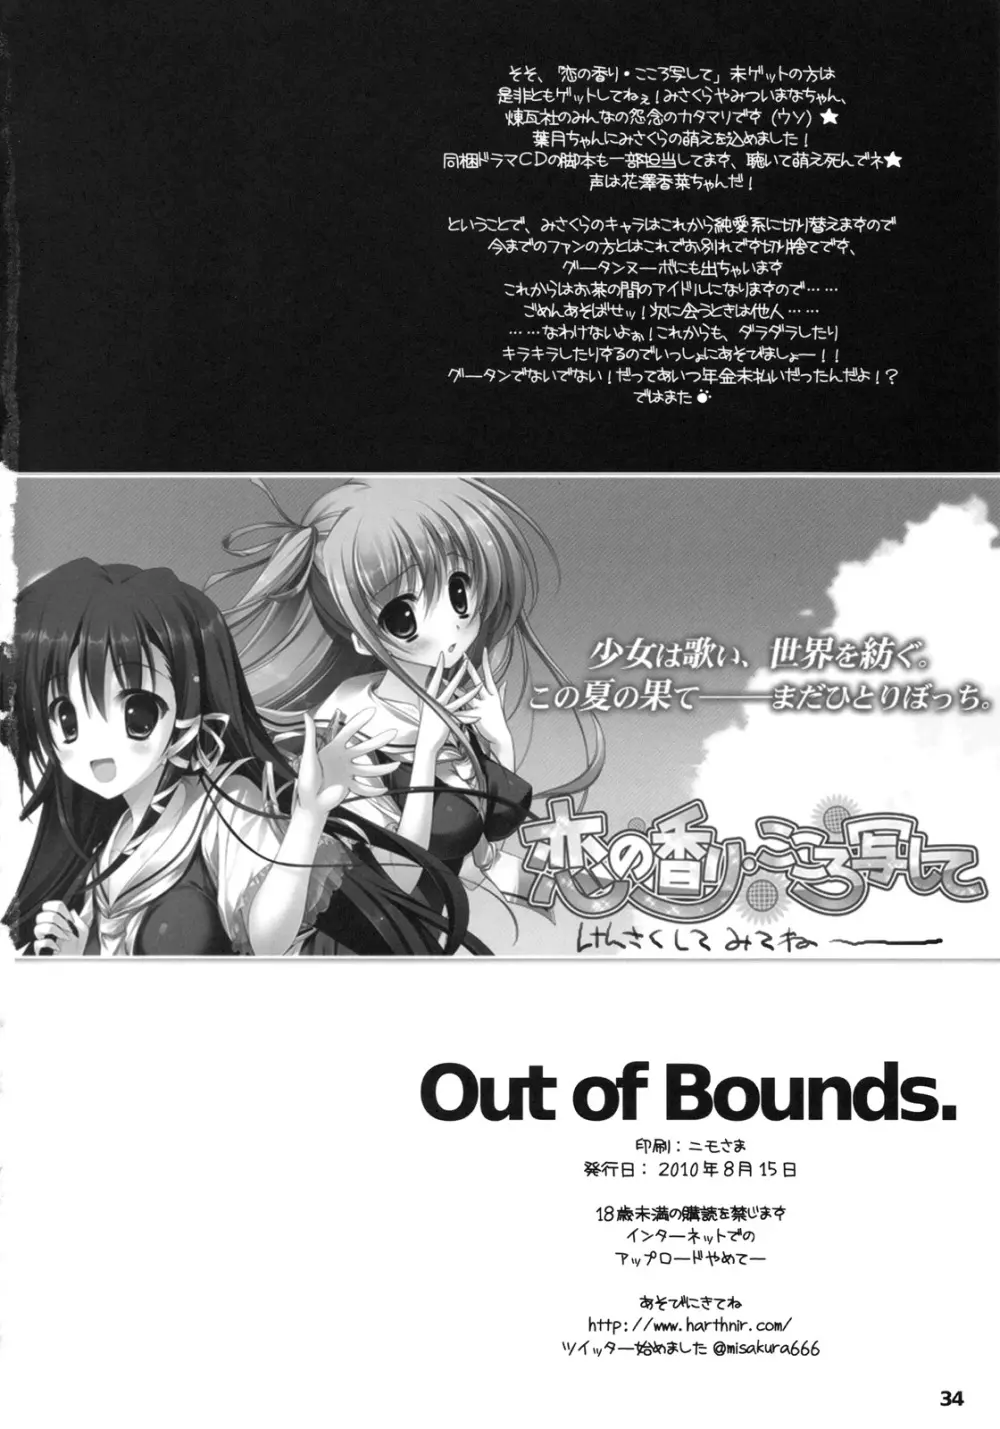 Out of Bounds. 33ページ